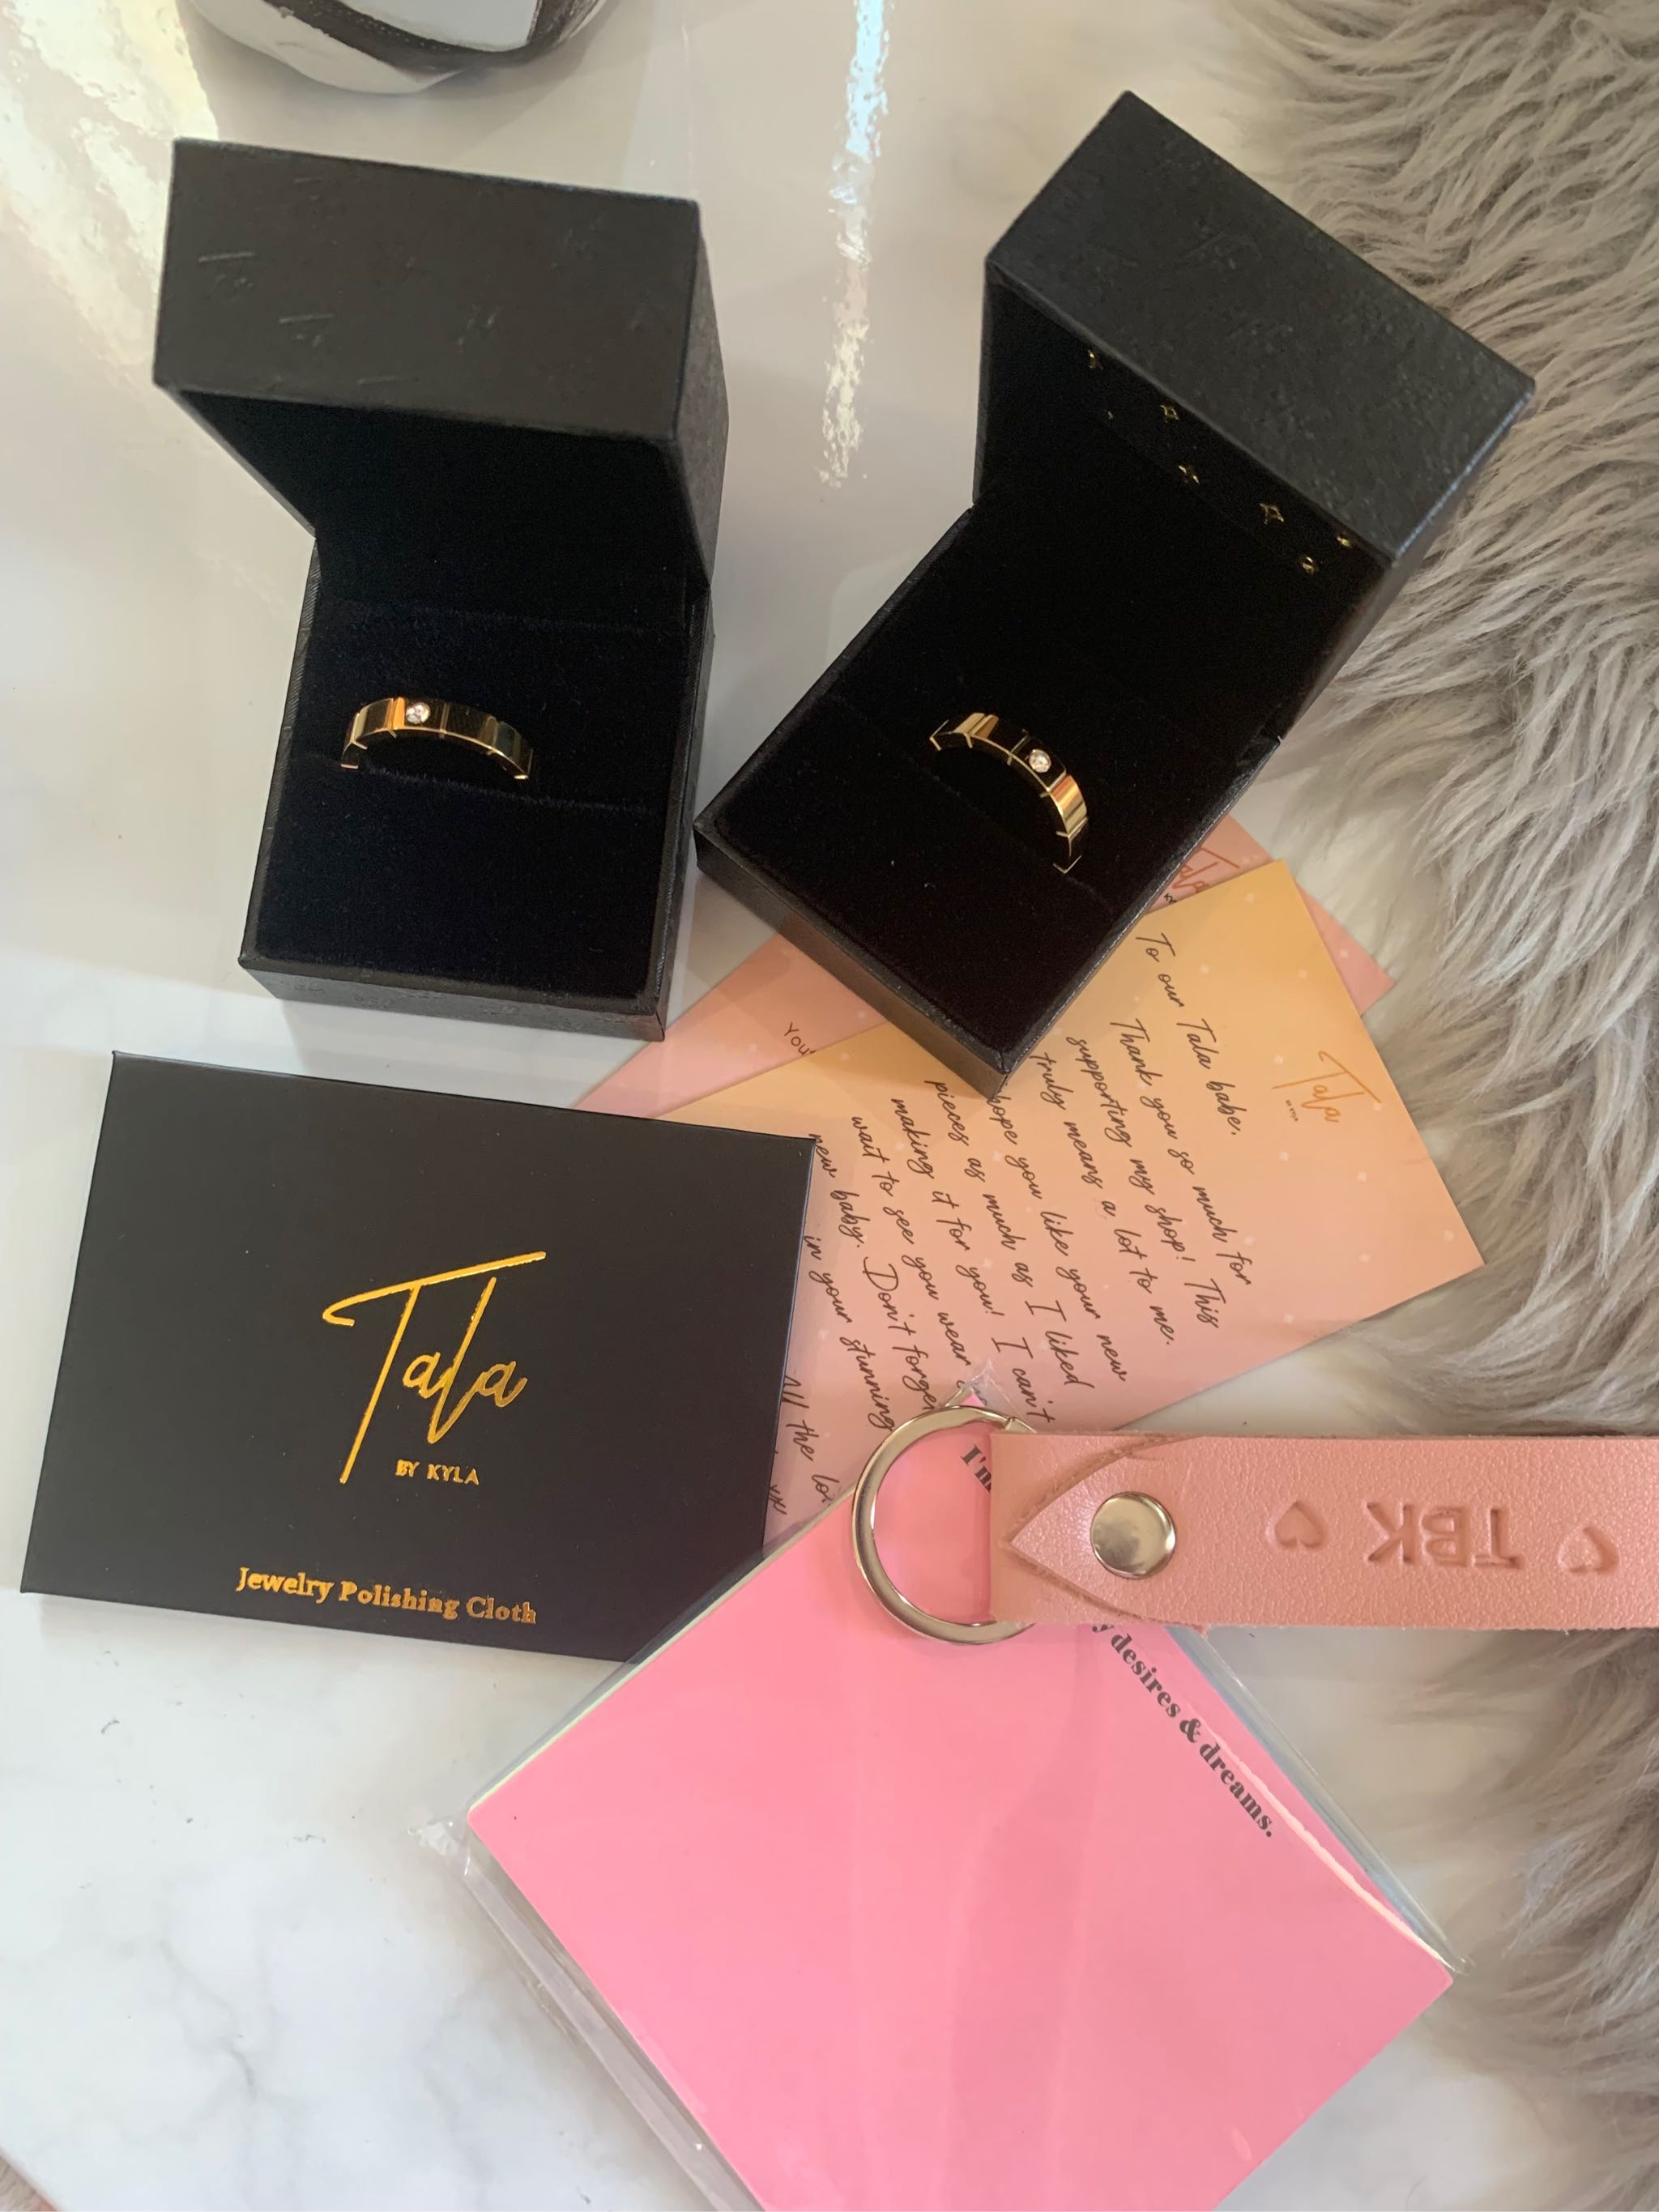 Tala by Kyla Promise Rings Plus Gift Box